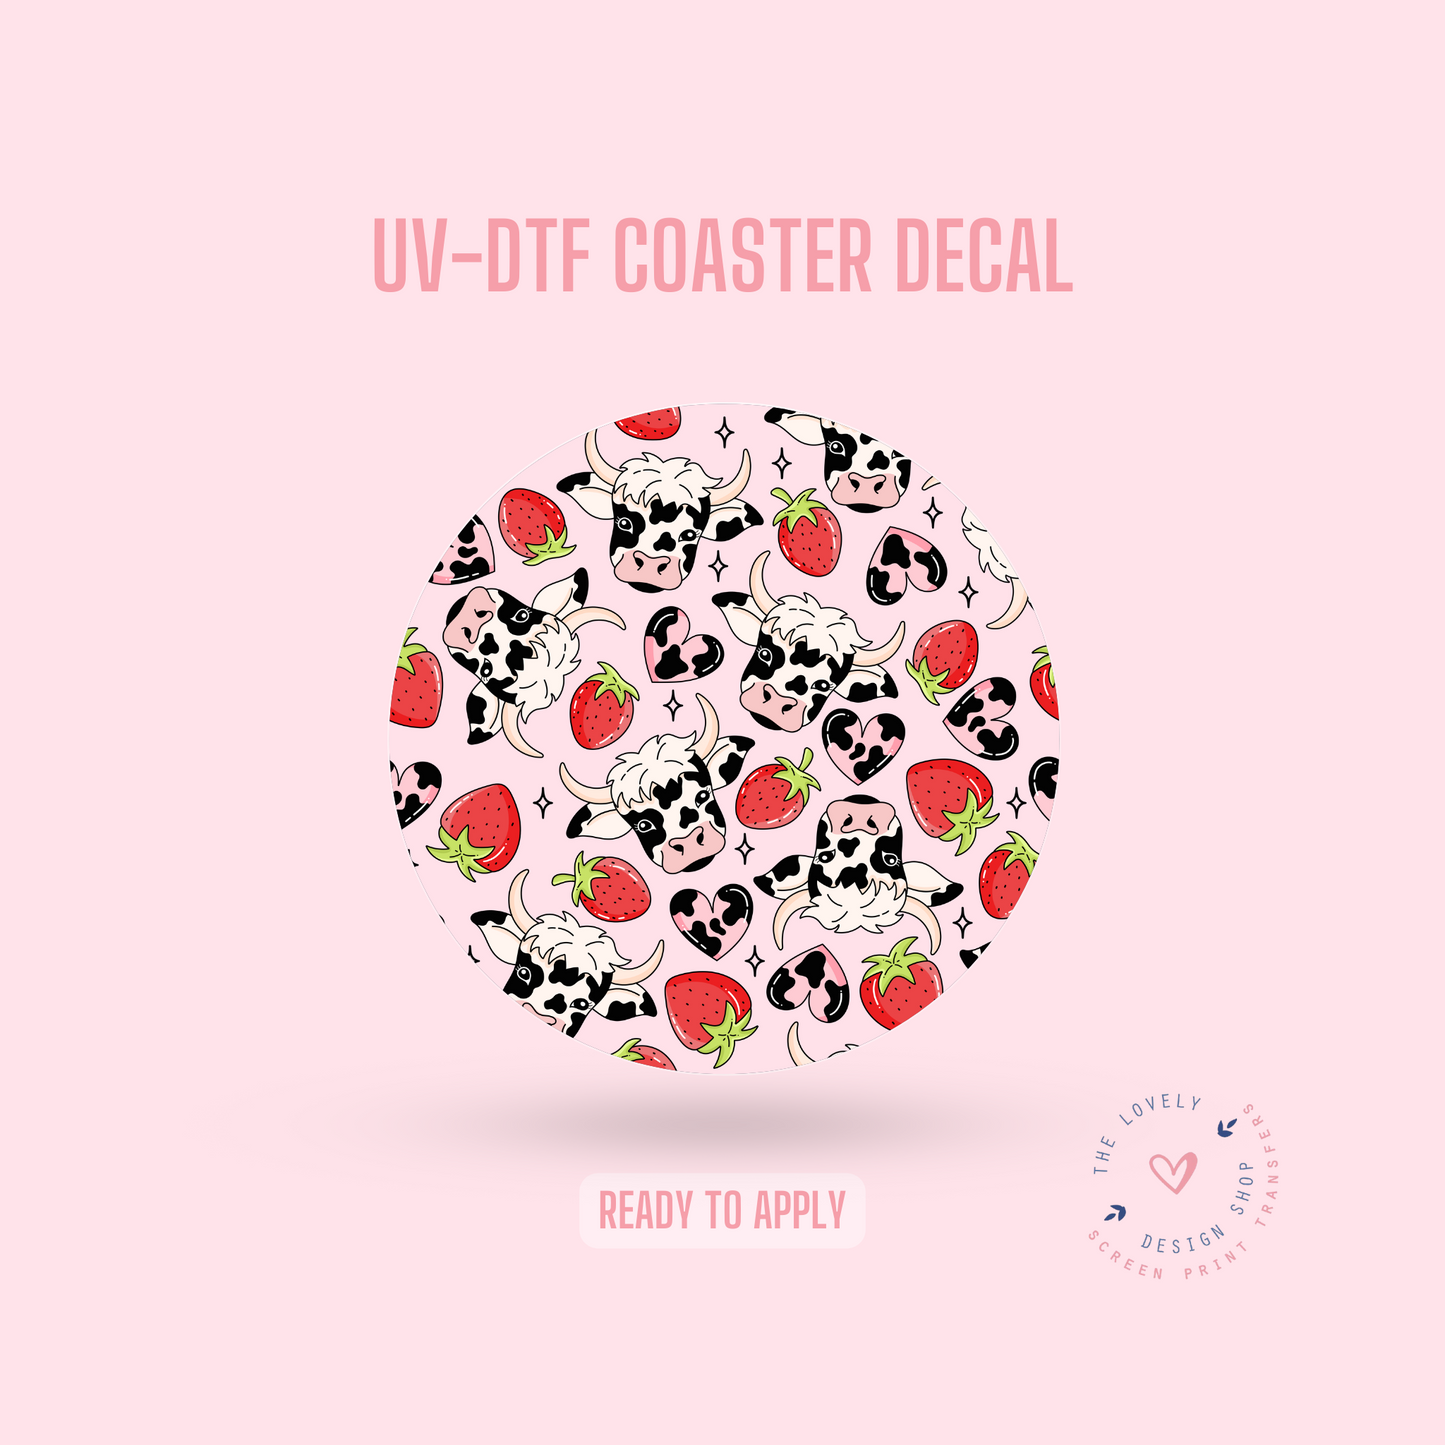 Cute Strawberry Cows - UV DTF Coaster Decal (Ready to Ship) May 28